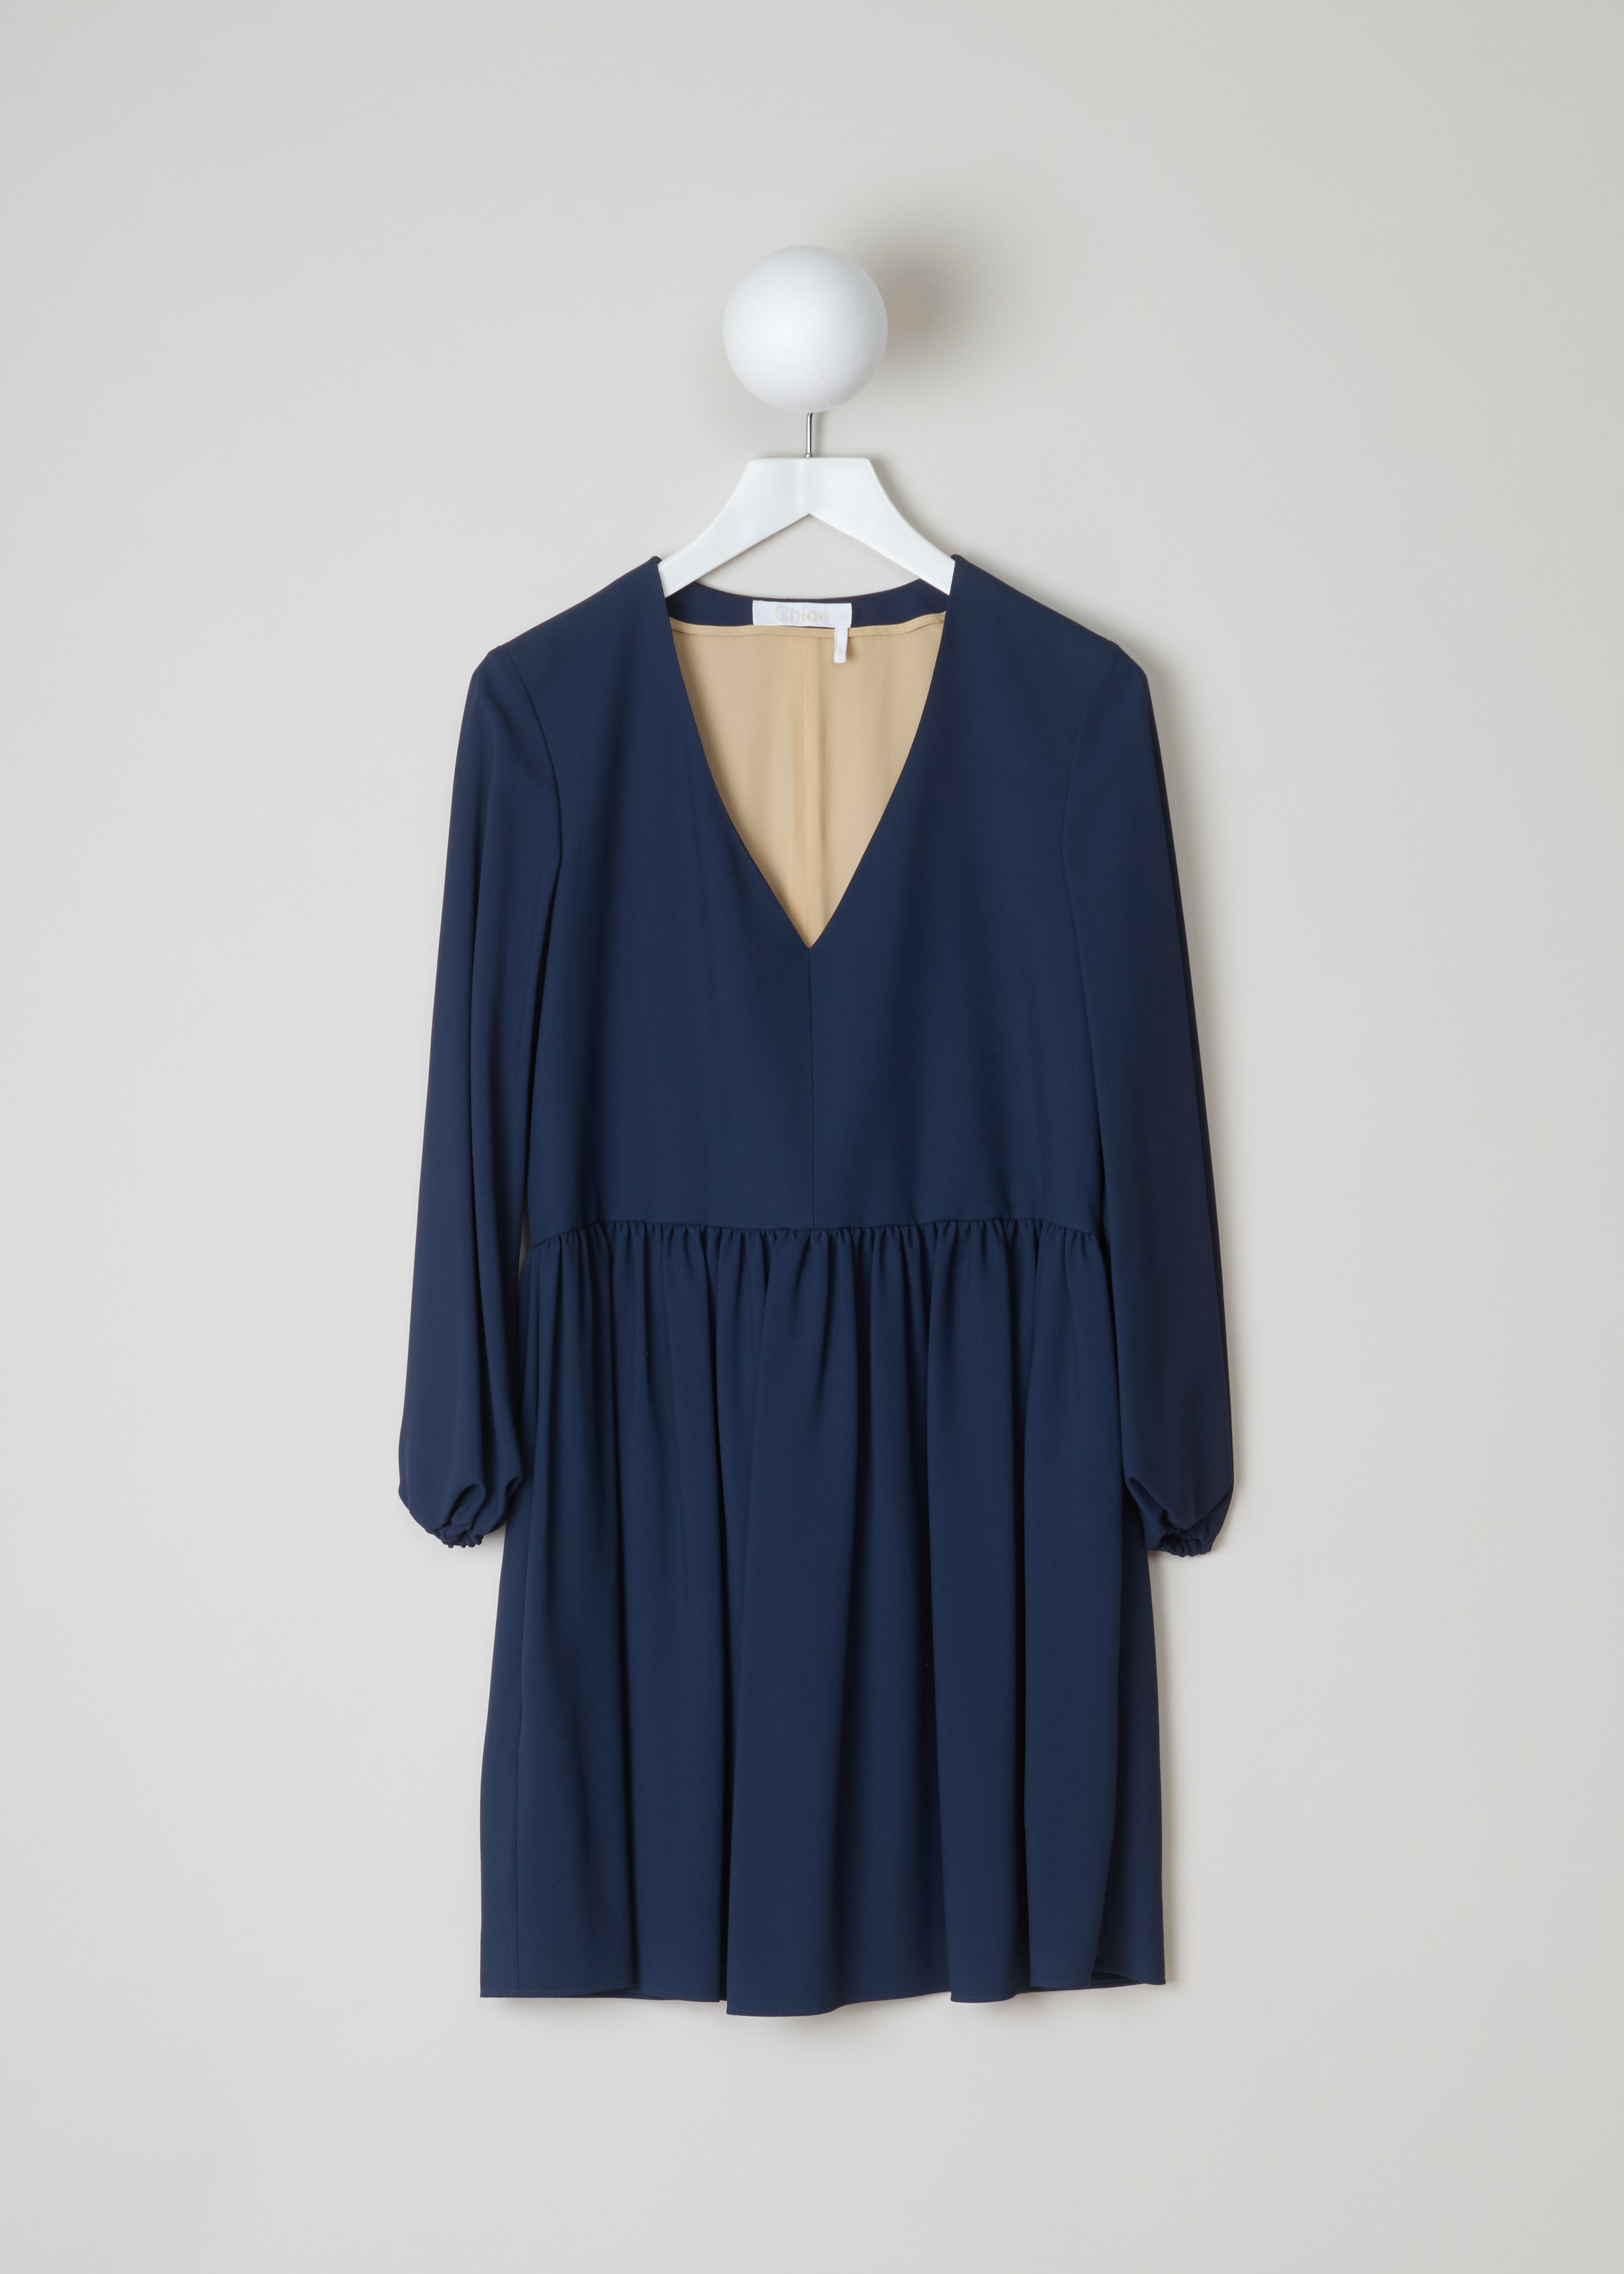 Chloé Gathered deep blue dress 17SRO65_17S37_7B5 deep blue front. Deep blue dress with a V-neck. This model has loose sleeves and gathered cuffs. The straight cut has small pleats around the waist and a midi length. As closure this dress has an invisible zipper on the side.